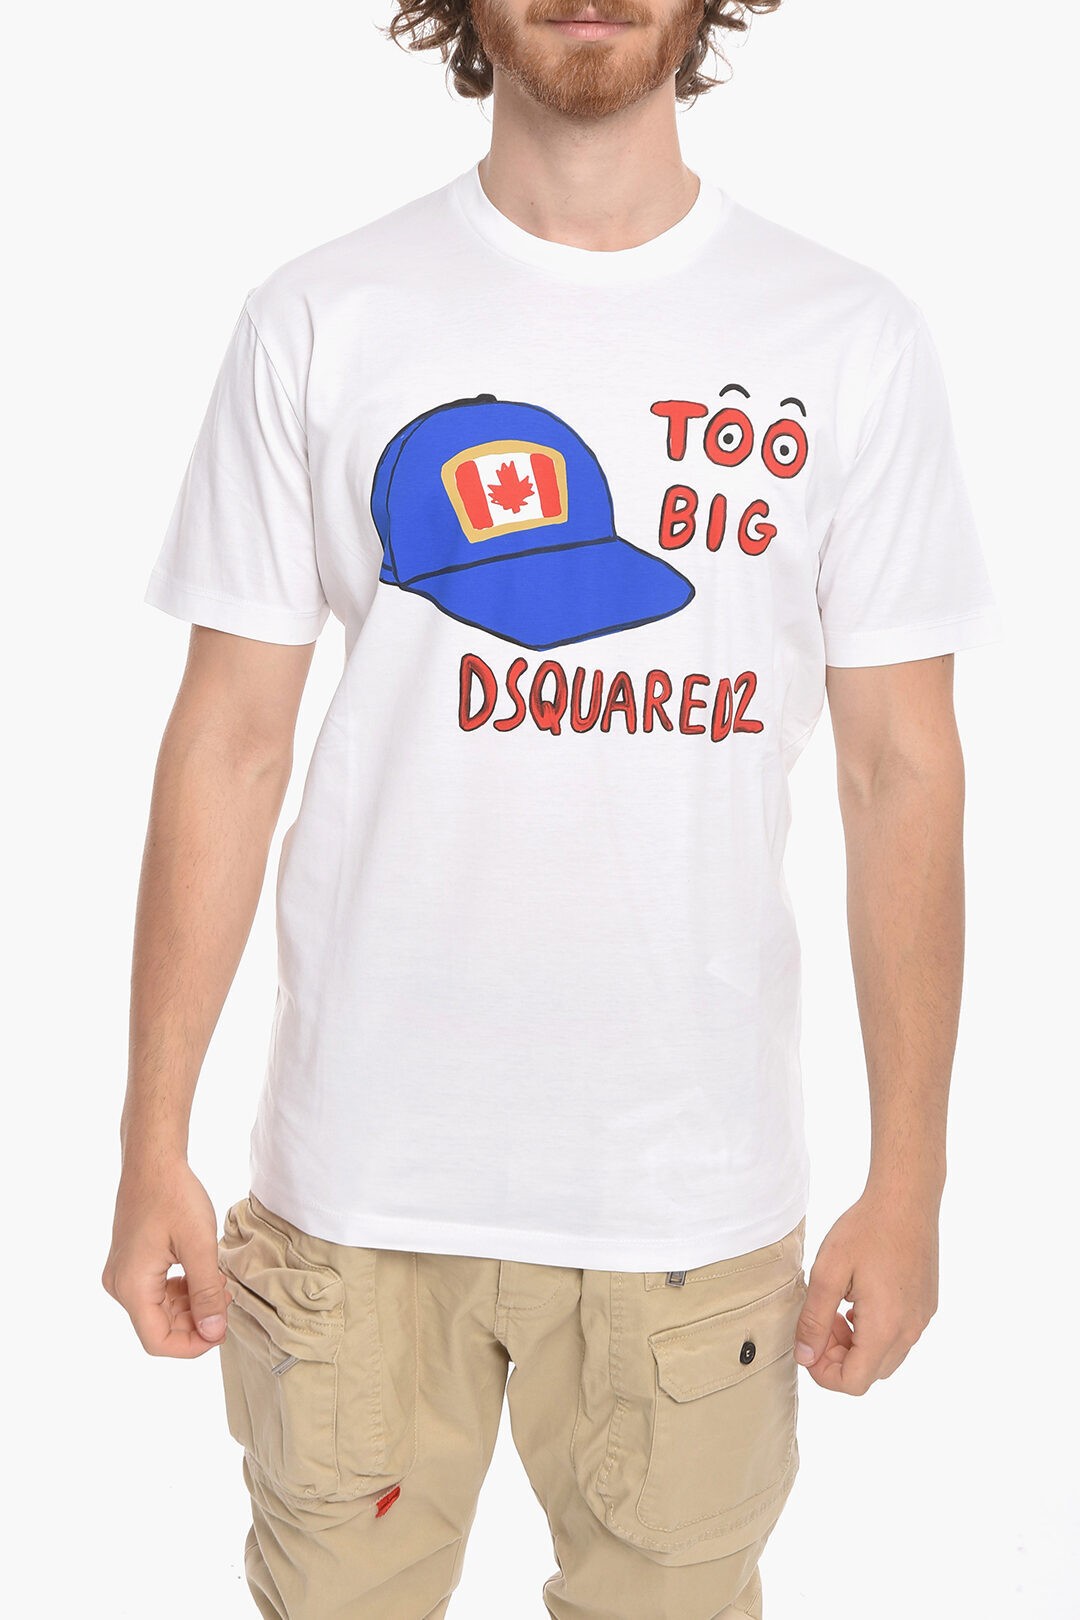 DSQUARED2 ディースクエアード トップス S71GD1185 S23009 100 メンズ CREW NECK TOO BIG COTTON T-SHIRT 【関税・送料無料】【ラッピング無料】 dk